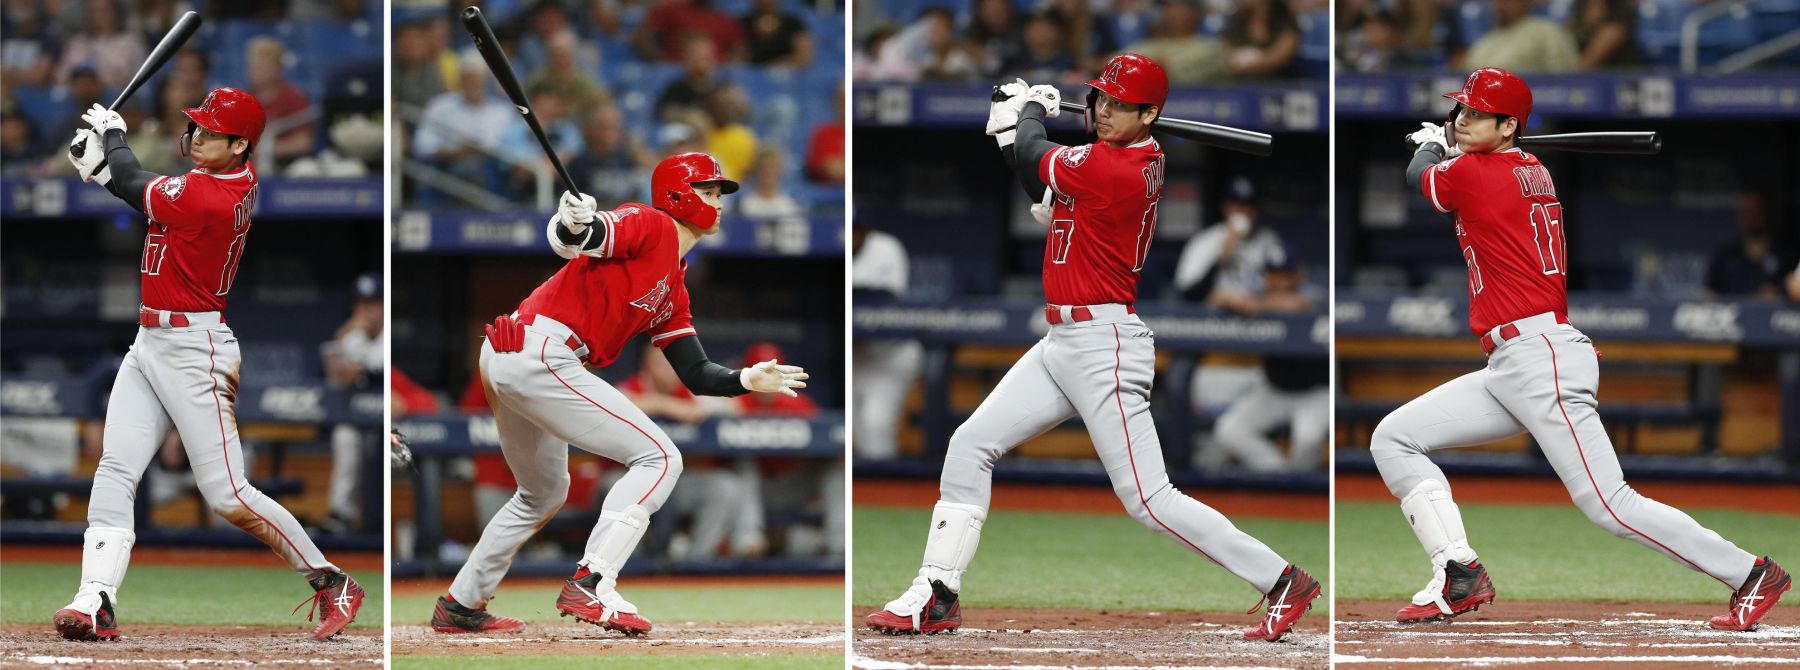 Shohei Ohtani First JapaneseBorn MLB Player to Hit for the